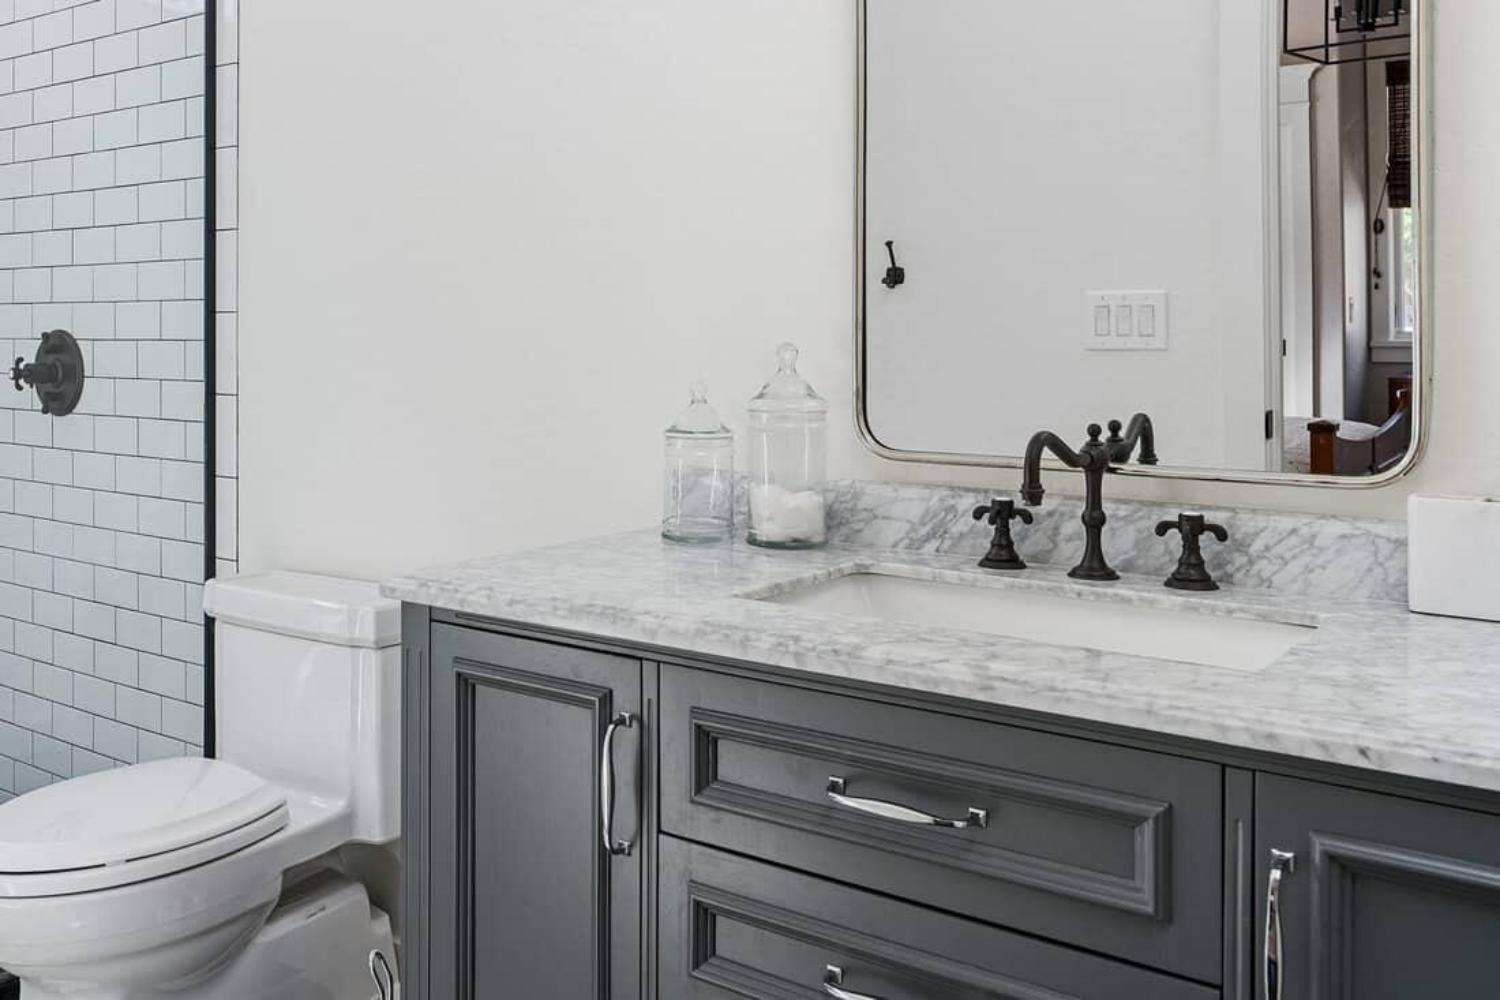 Harmony in Design: Should Bathroom Faucets Match Light Fixtures - Blog - 2